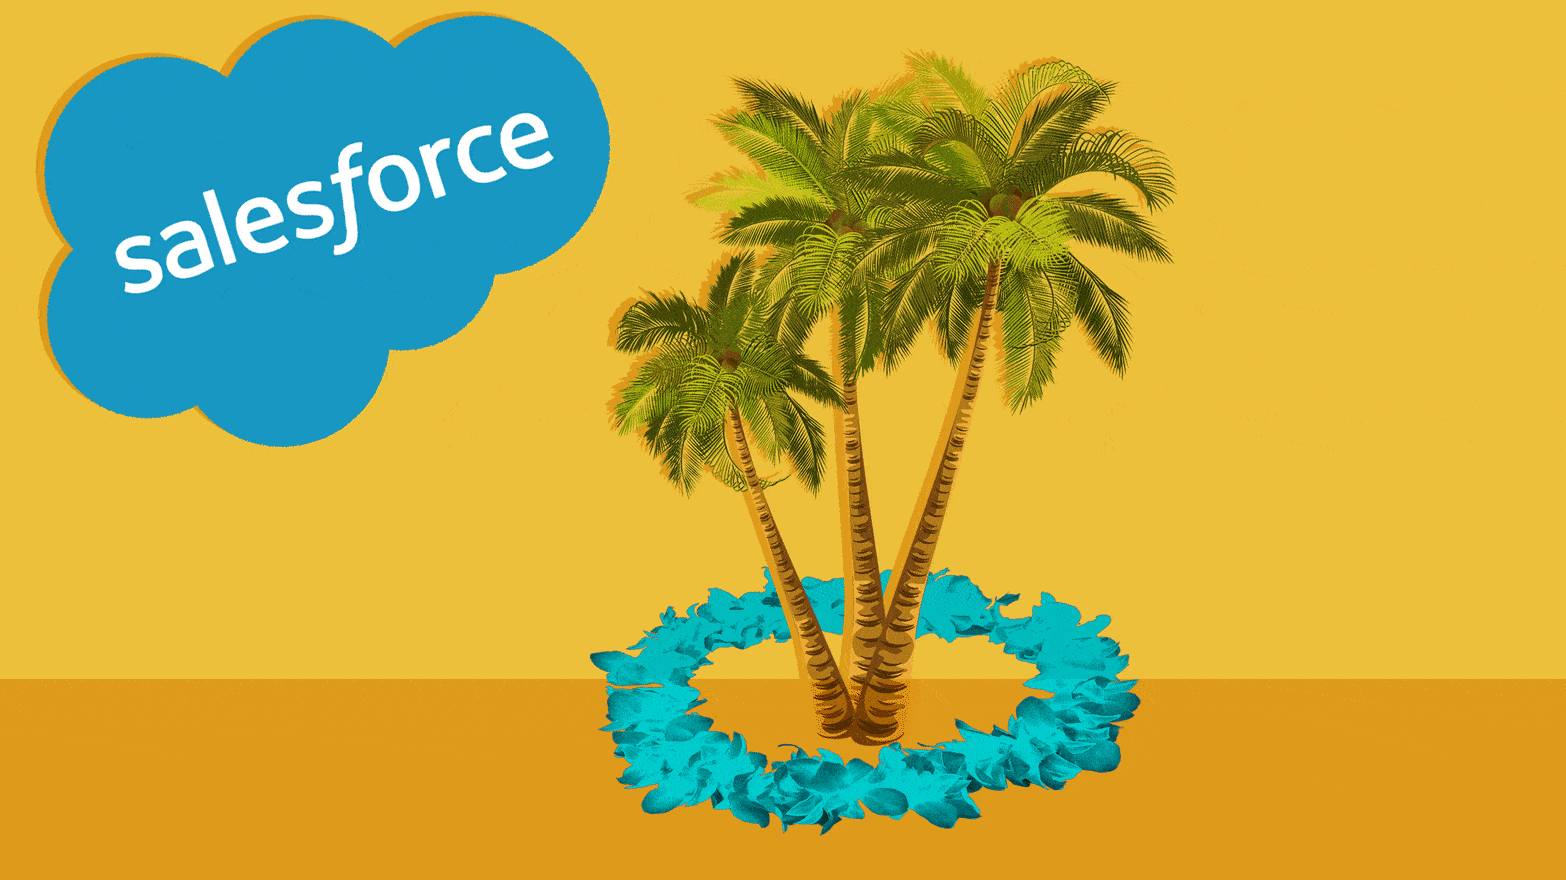 Illustration of a palm tree being lassoed by a lei, with a "Salesforce" logo in background